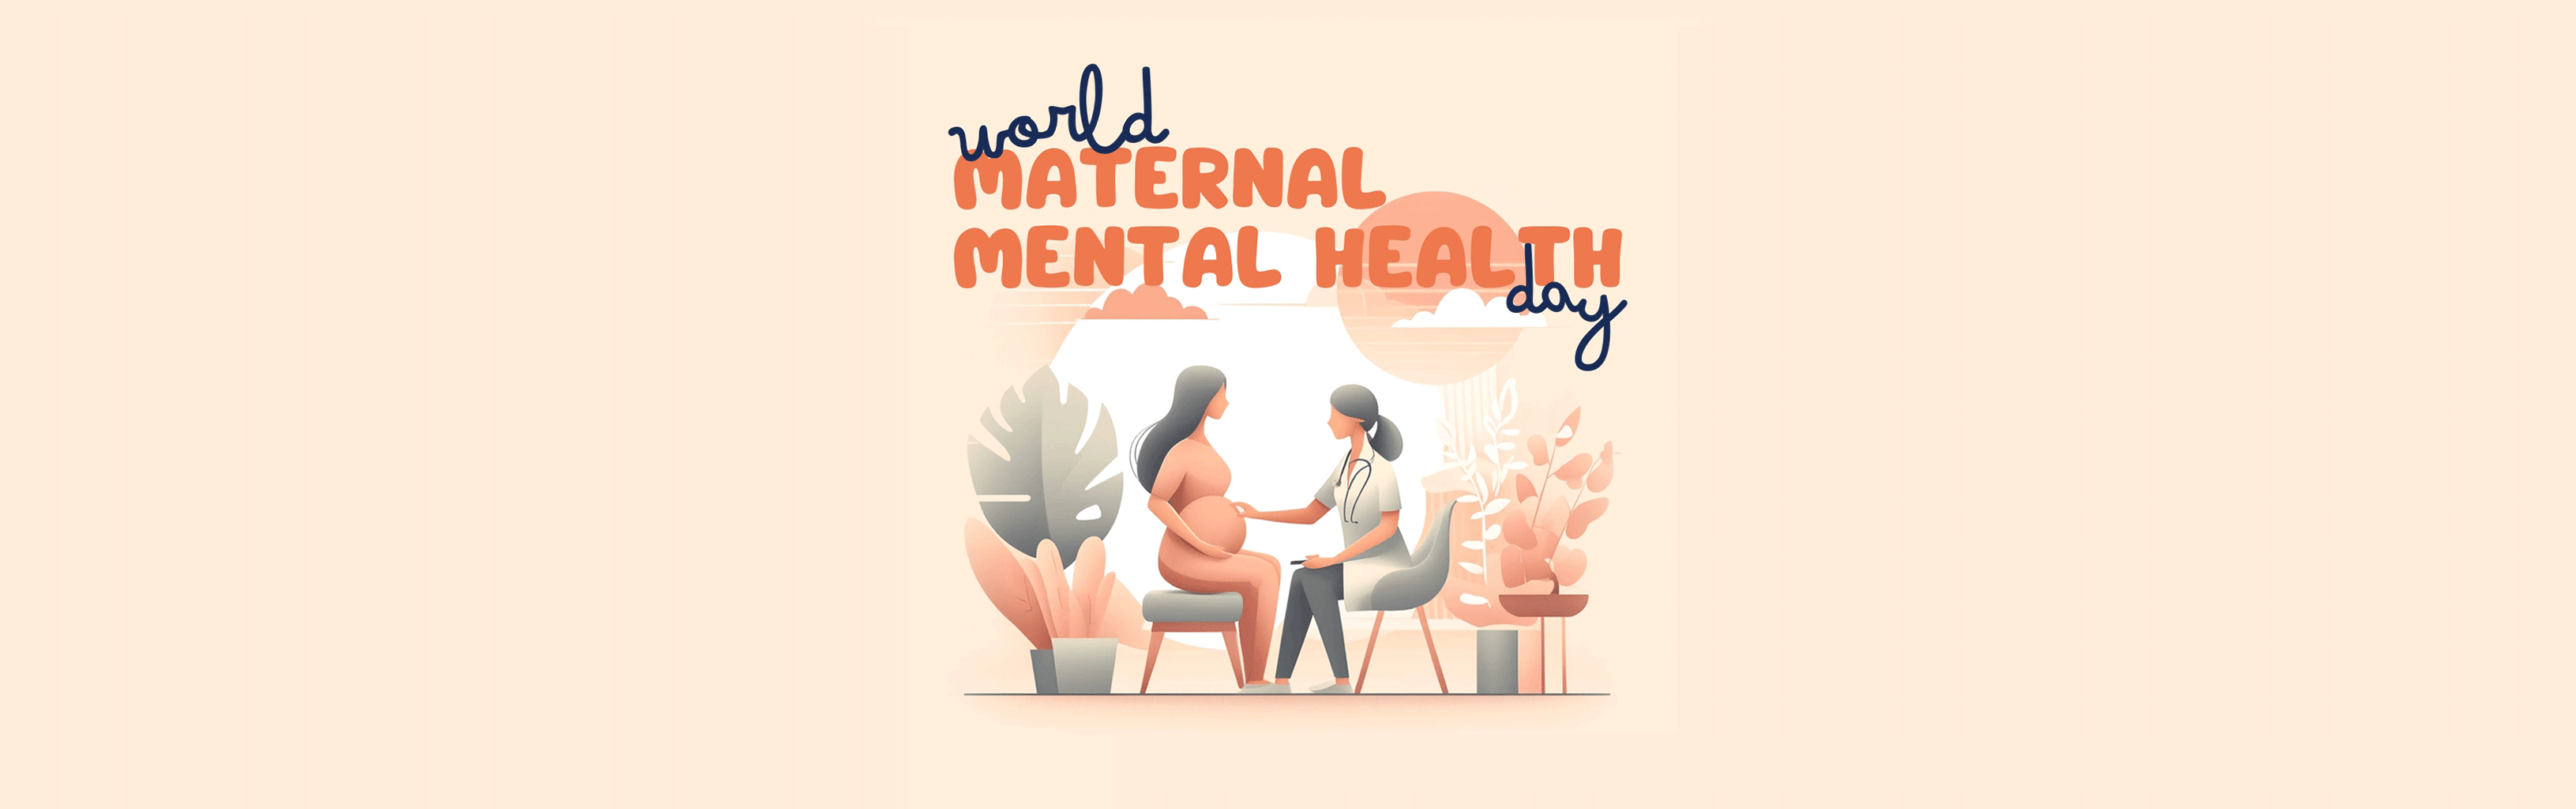 Illustration of a pregnant woman talking with a healthcare provider in a soothing, plant-filled setting, highlighting World Maternal Mental Health Awareness week by London Pregnancy Clinic.